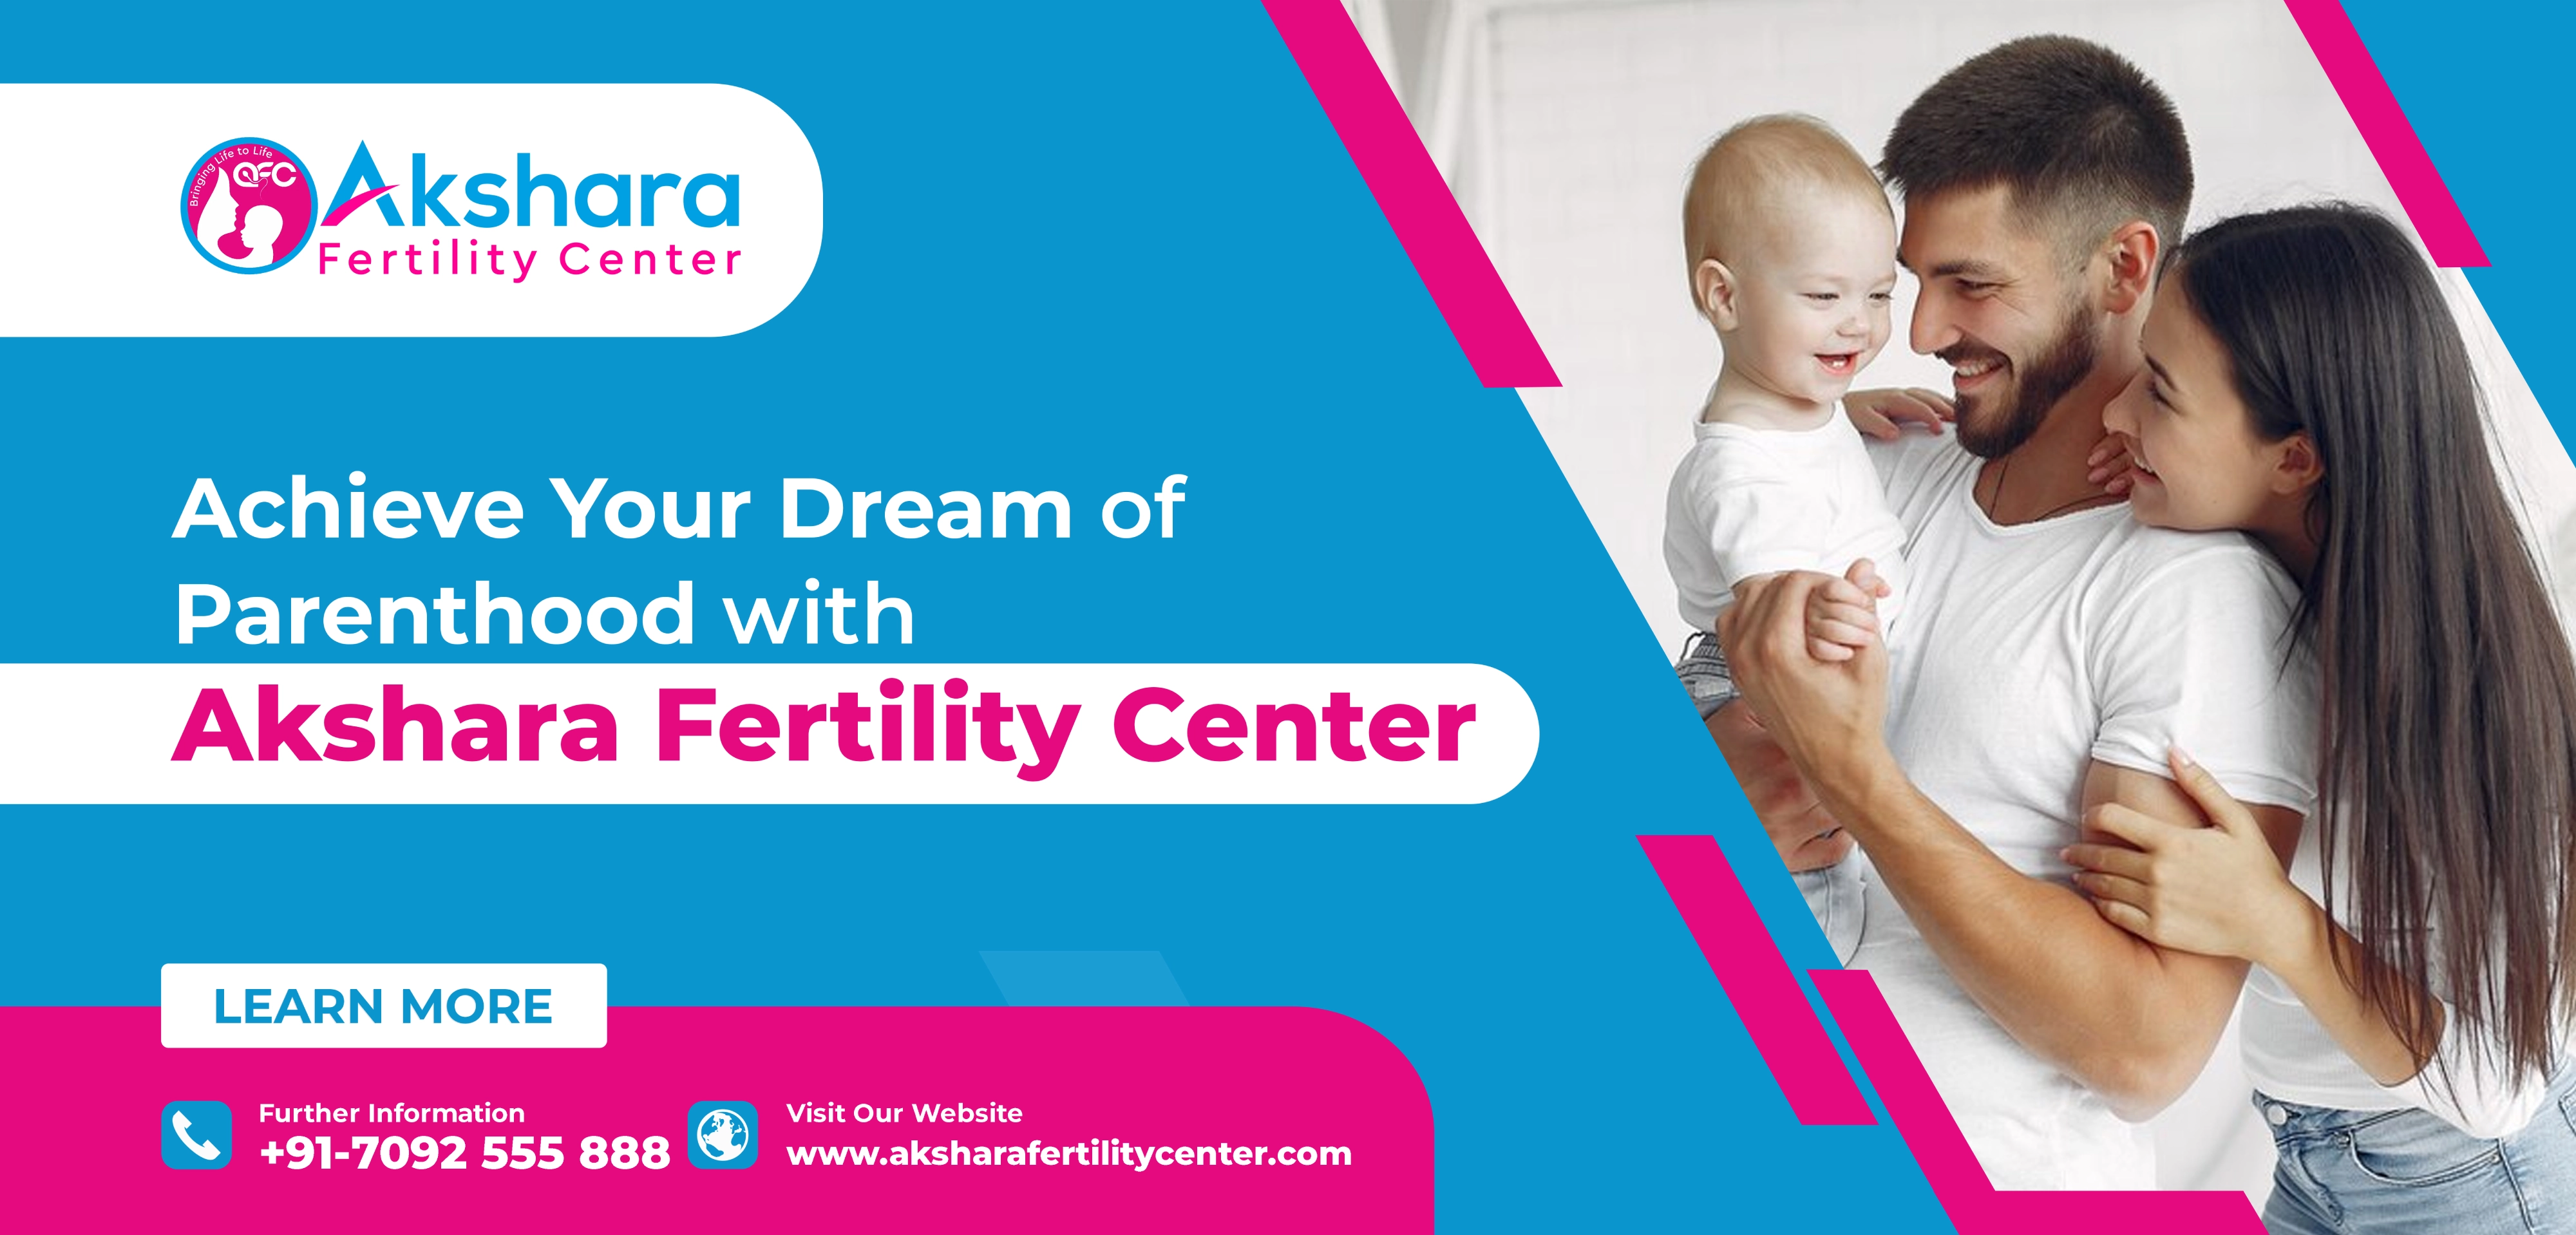 Achieve Your Dream of Parenthood with Akshara Fertility Center: Top IVF Clinic in Chennai Offering Advanced, Personalized Treatments